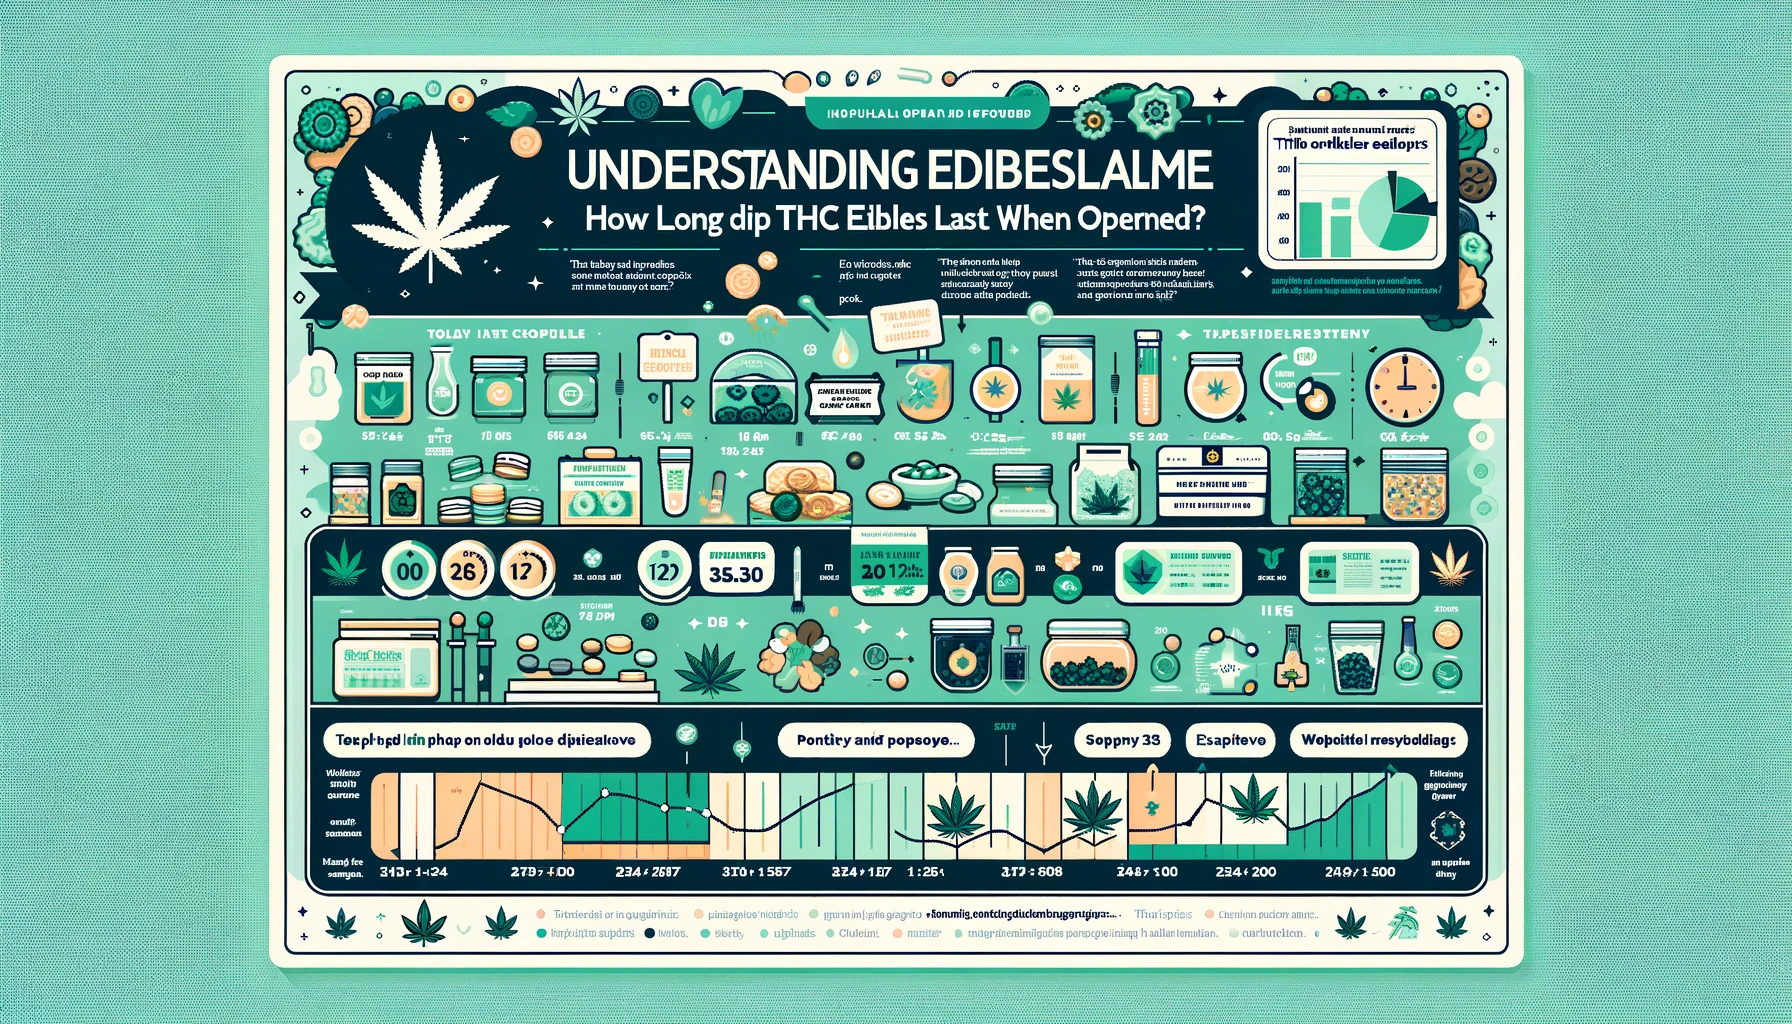 An image showing 'Understanding the Lifespan of Edibles